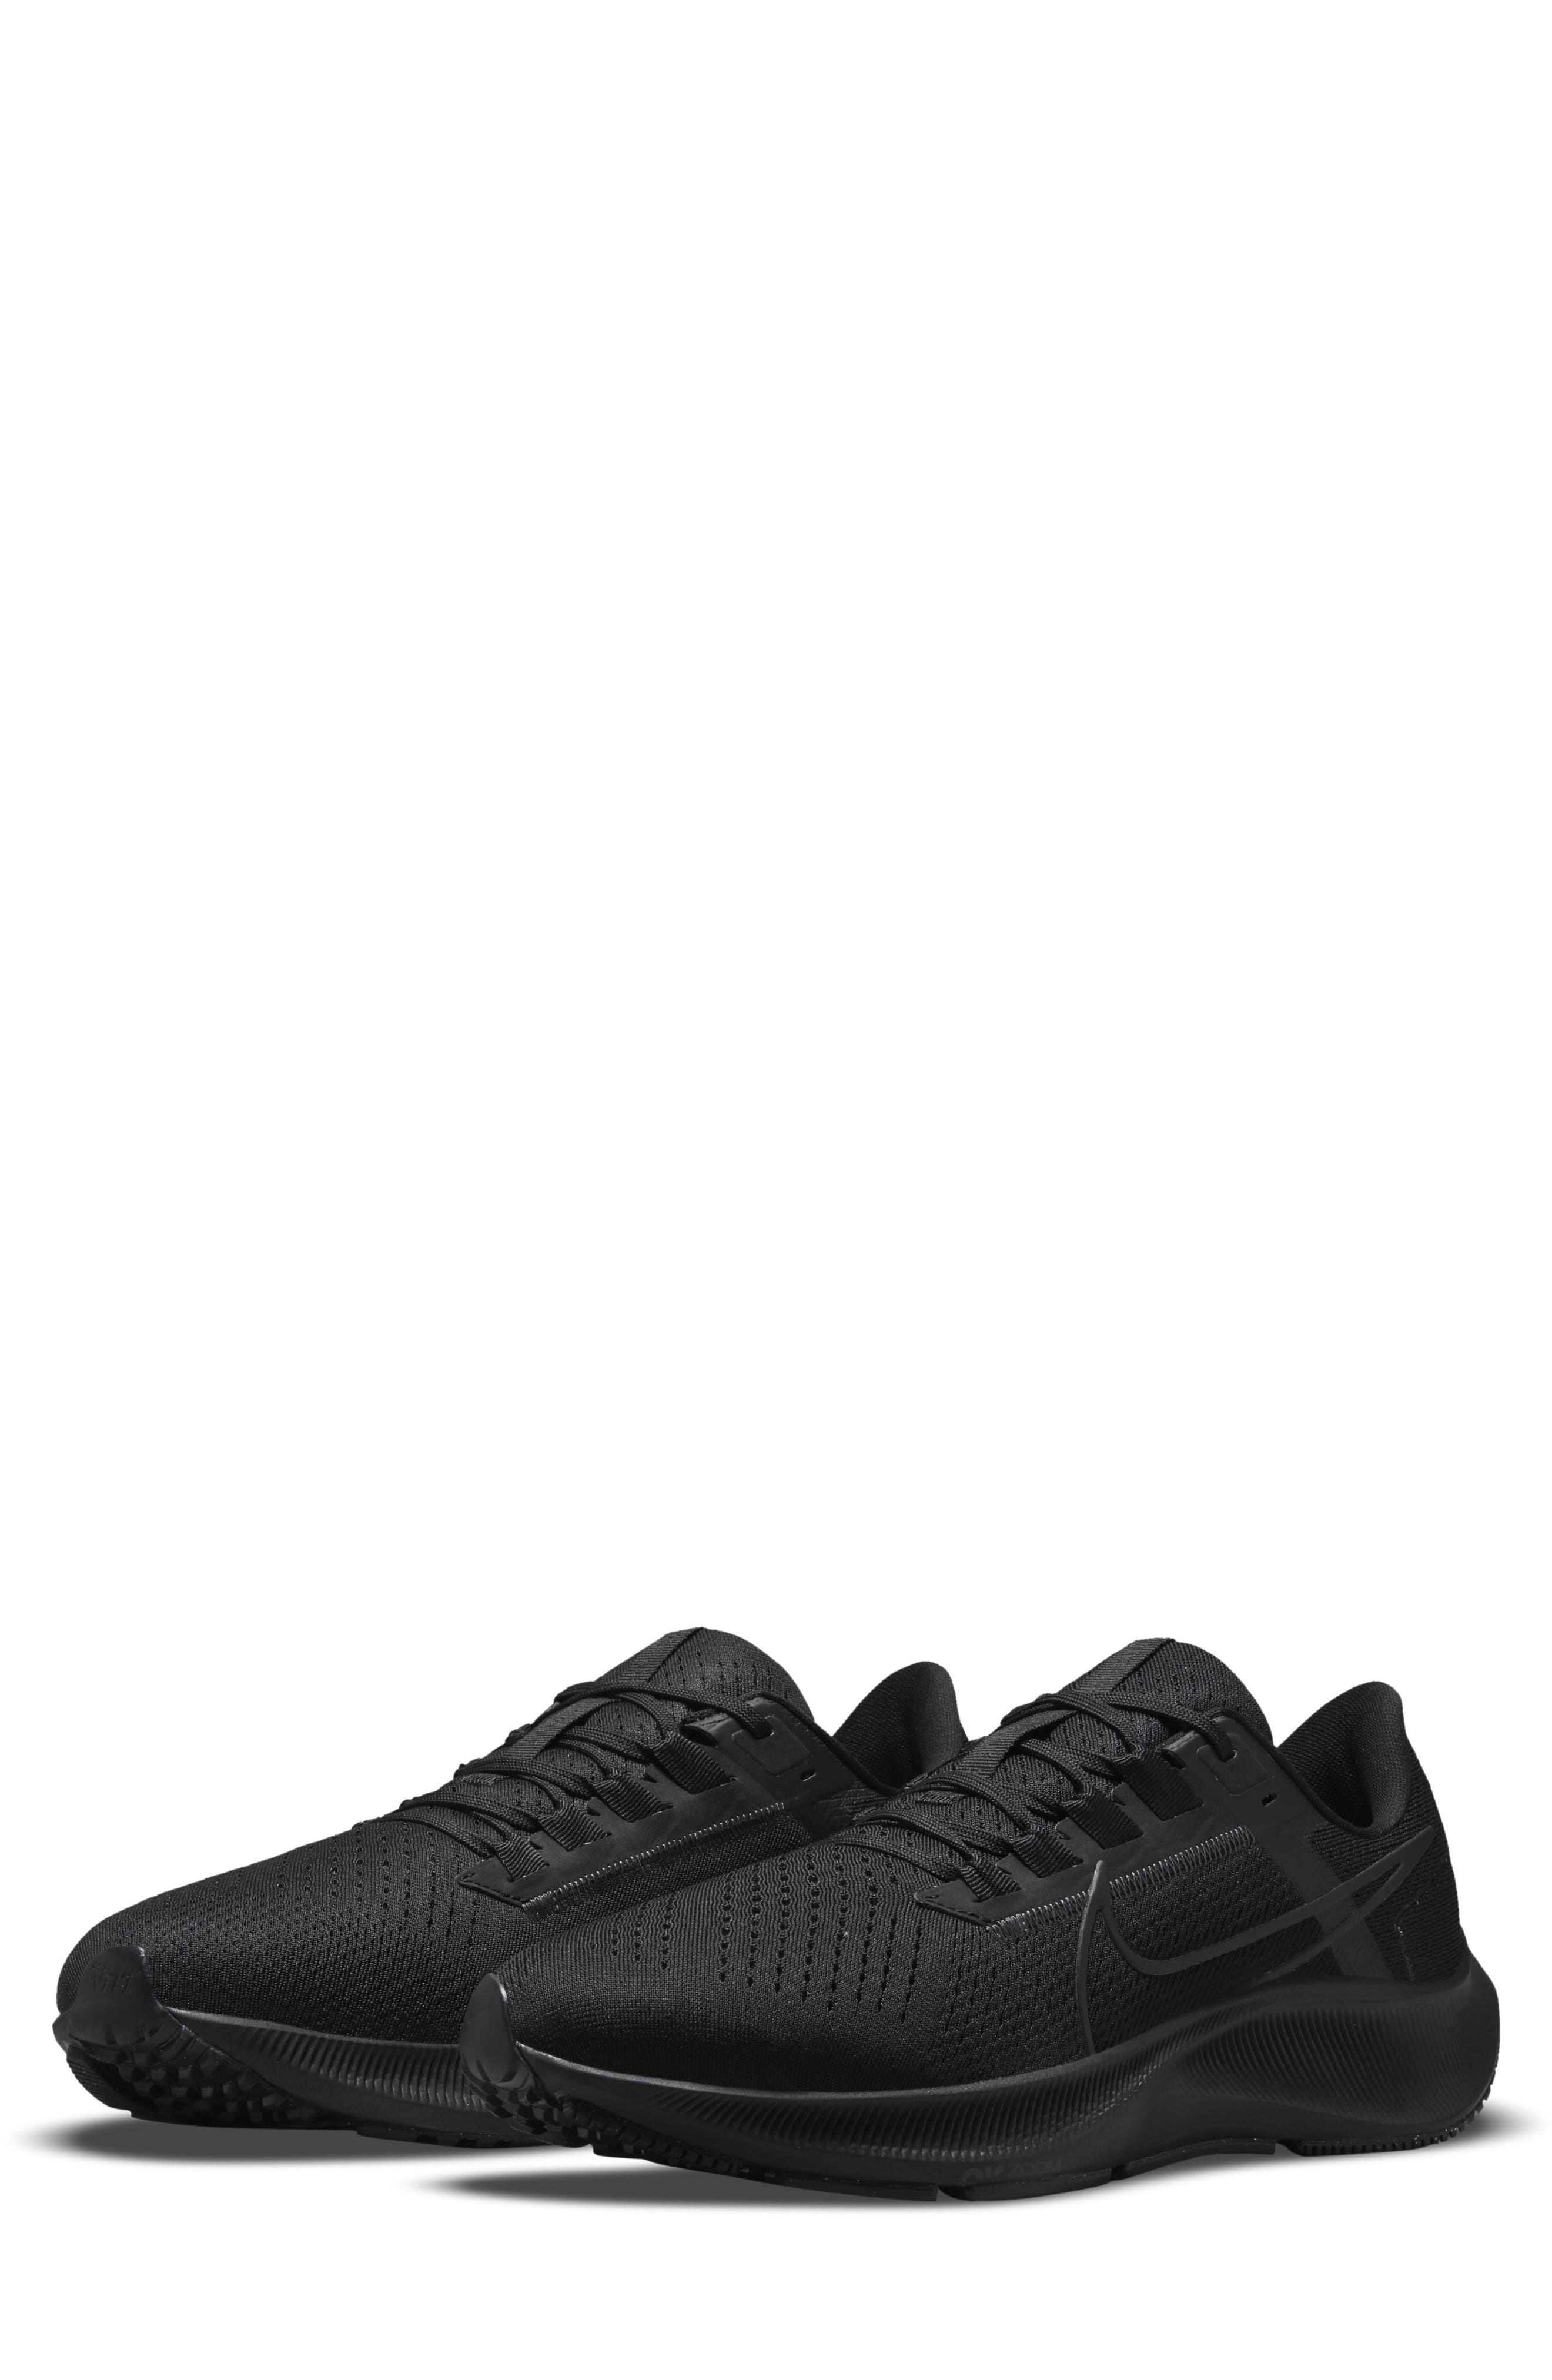 Buy > running shoes all black > in stock